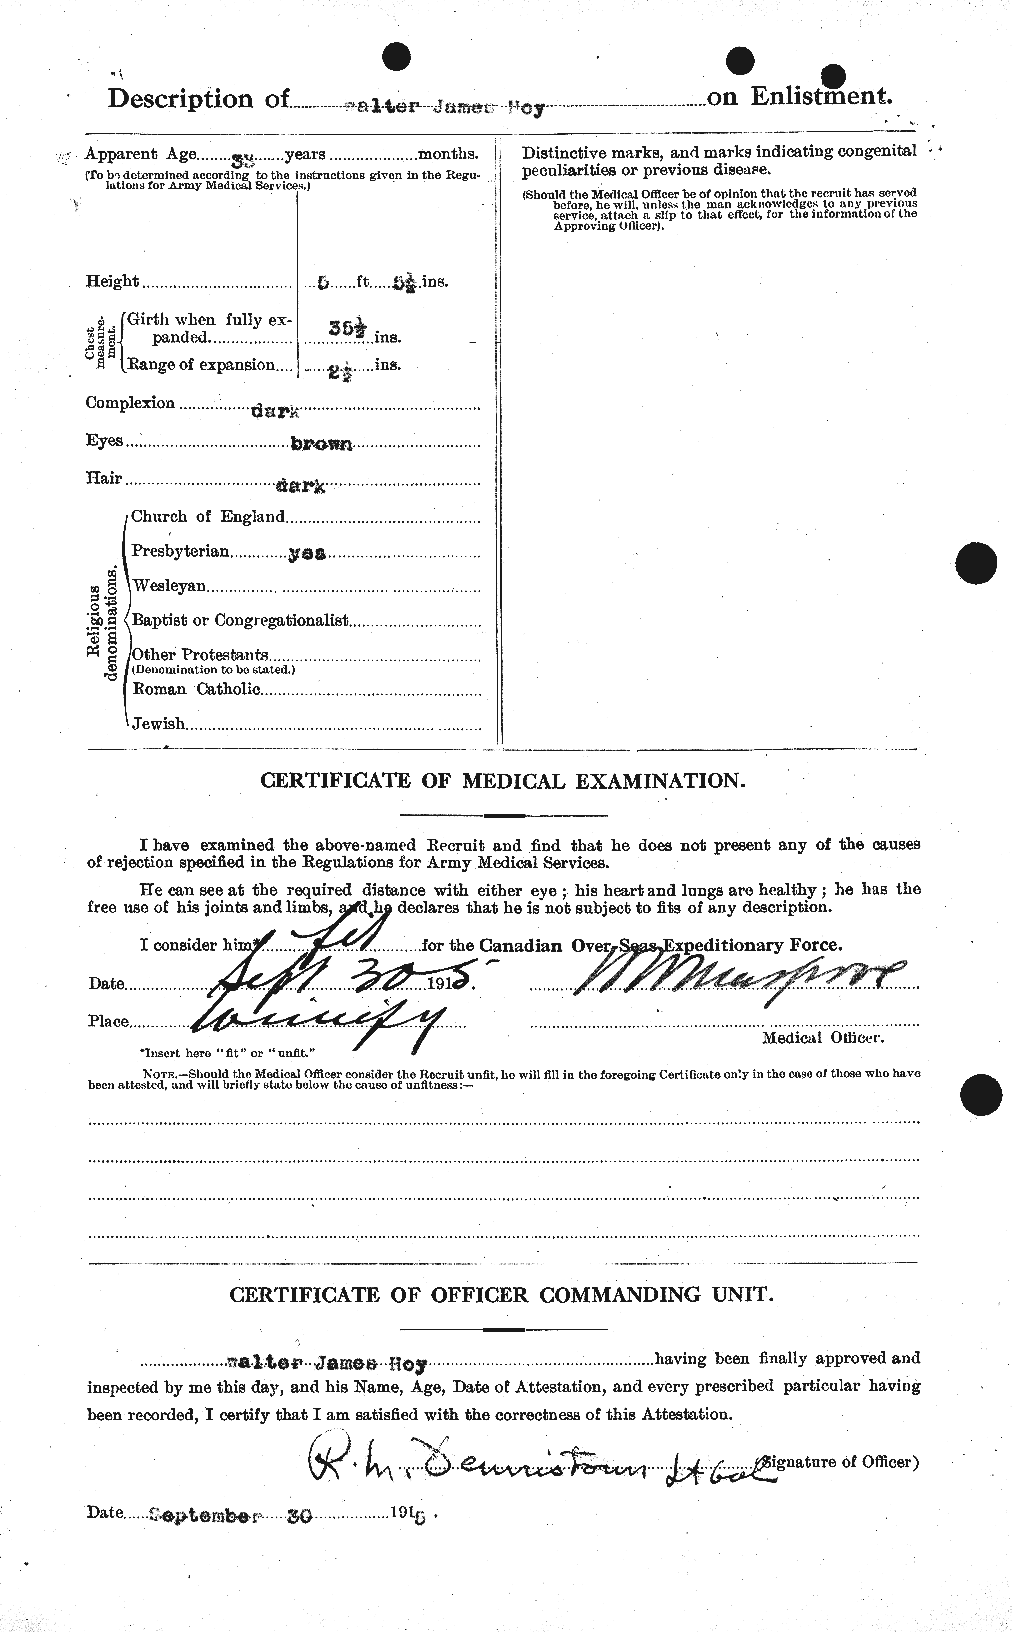 Personnel Records of the First World War - CEF 404633b